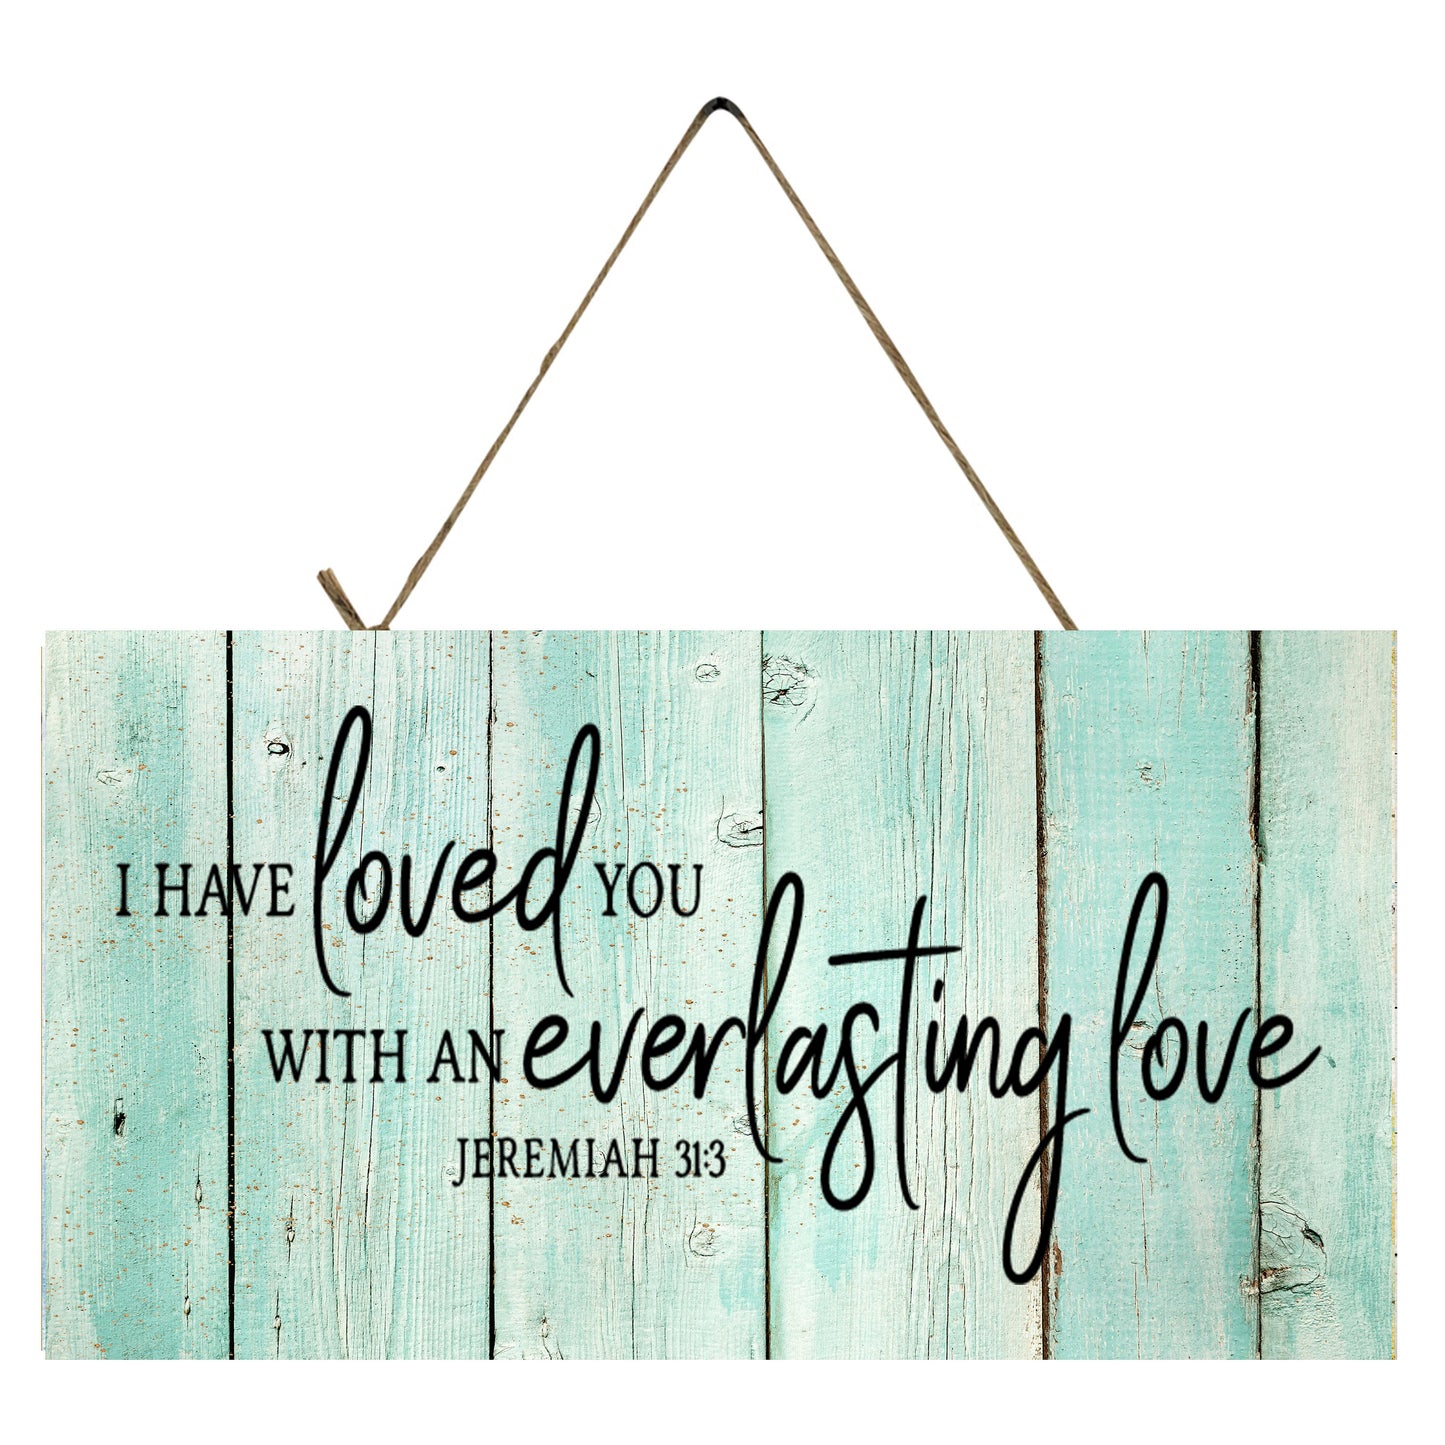 I Have Loved You With an Everlasting Love Jeremiah 31:3 Printed Handmade Wood Sign